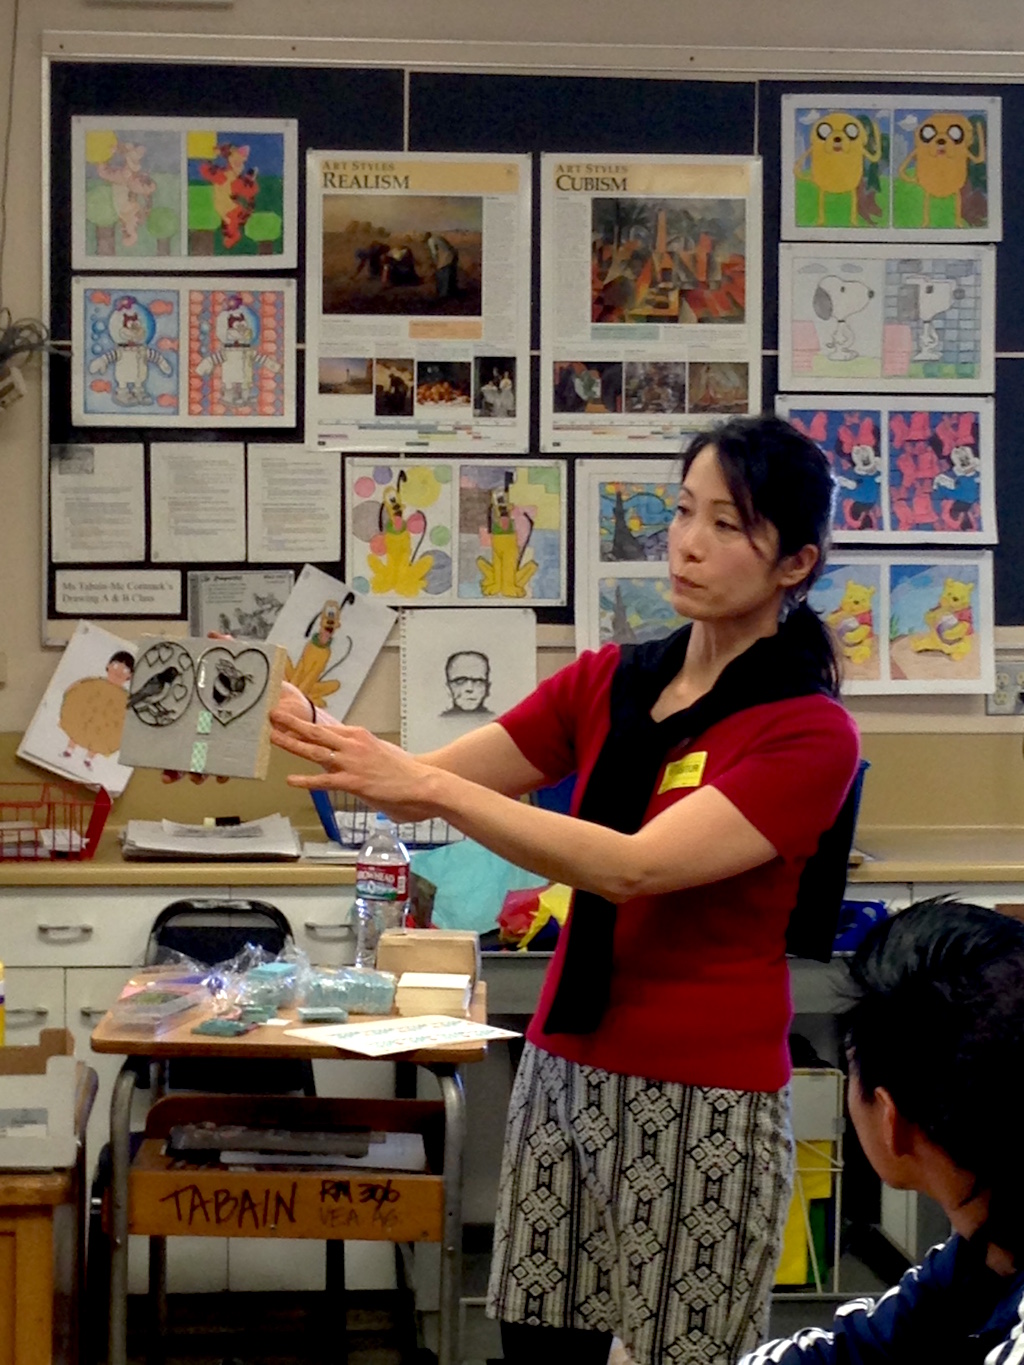 Yamamoto teaches local Van Nuys High School students about carved wood block traditions and printmaking.